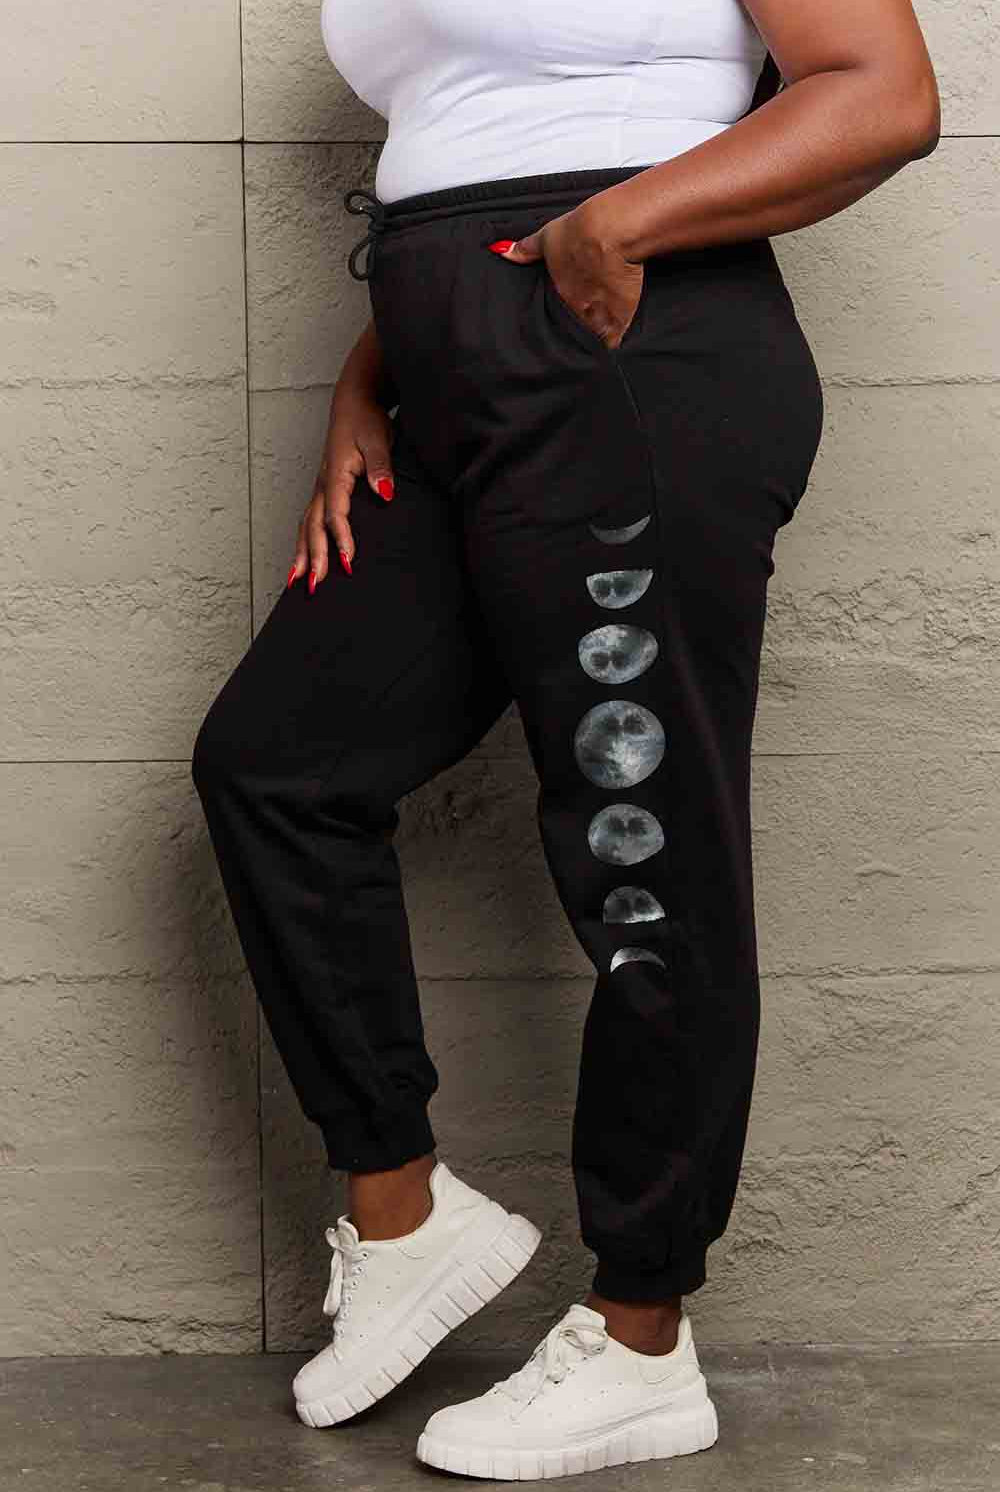 Dim Gray Simply Love Full Size Lunar Phase Graphic Sweatpants Sweatpants